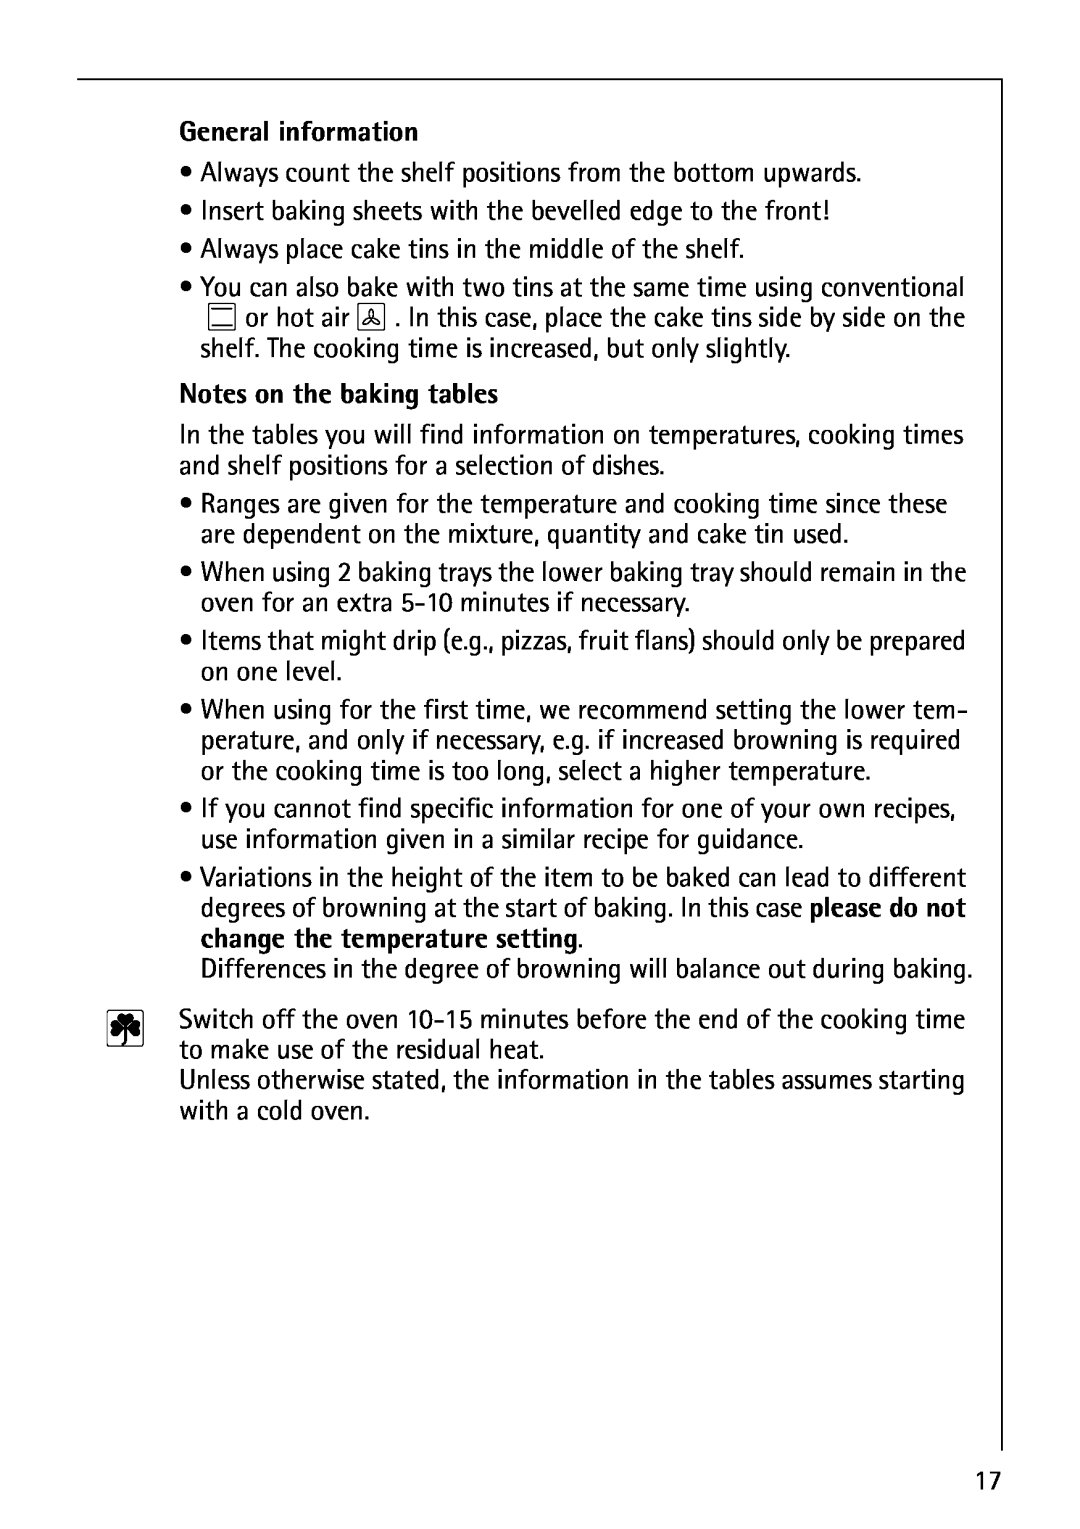 AEG B3040-1 manual General information, Notes on the baking tables 